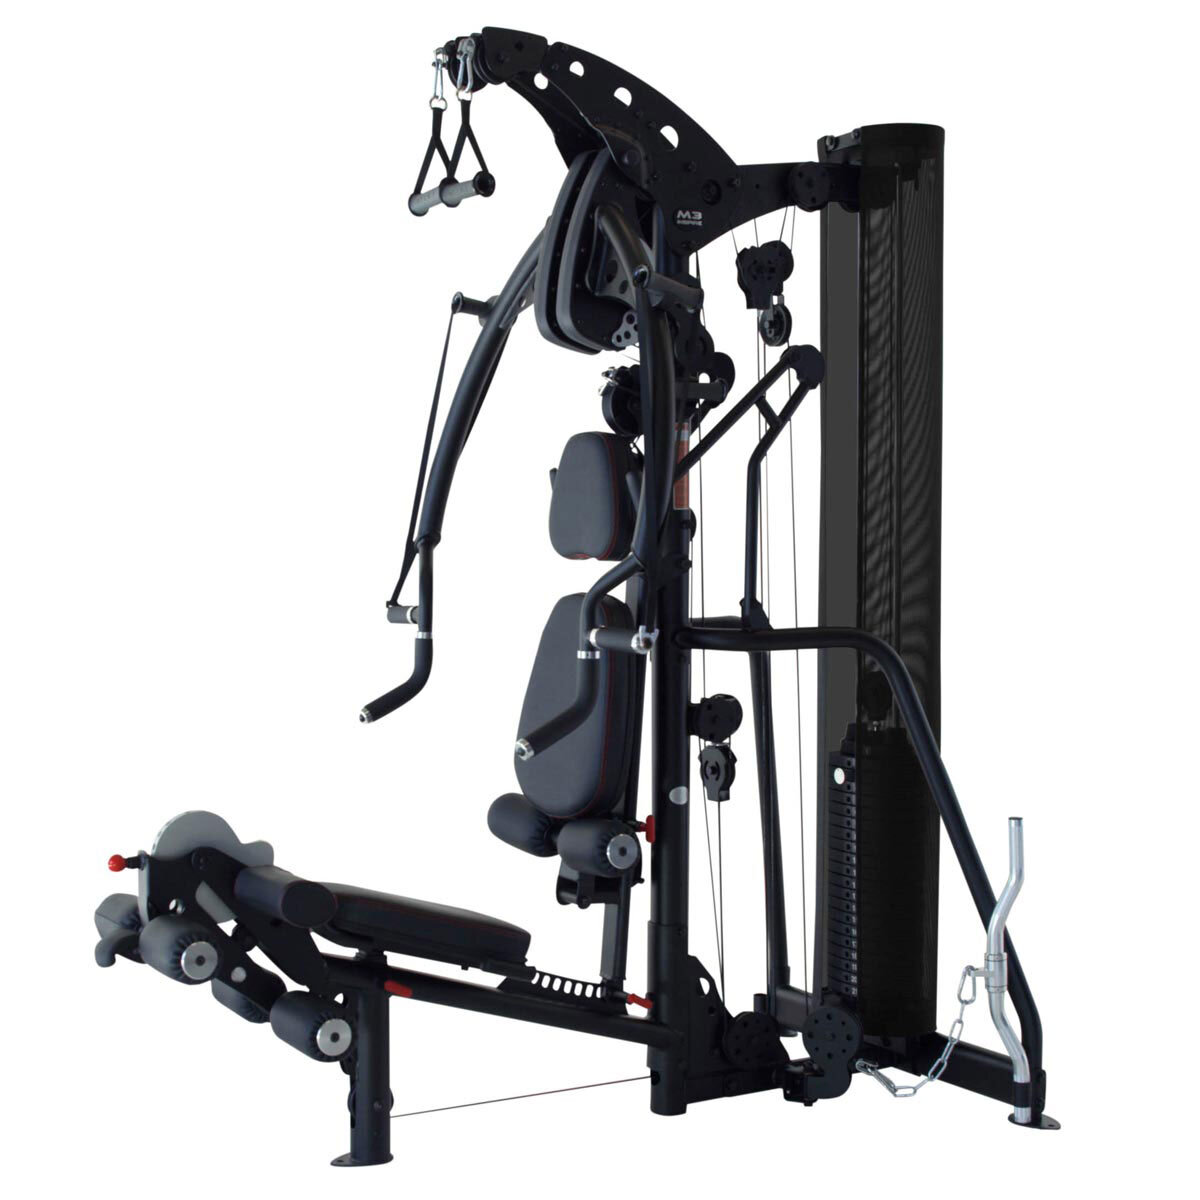 Lead image for M3 Inspire Home Gym